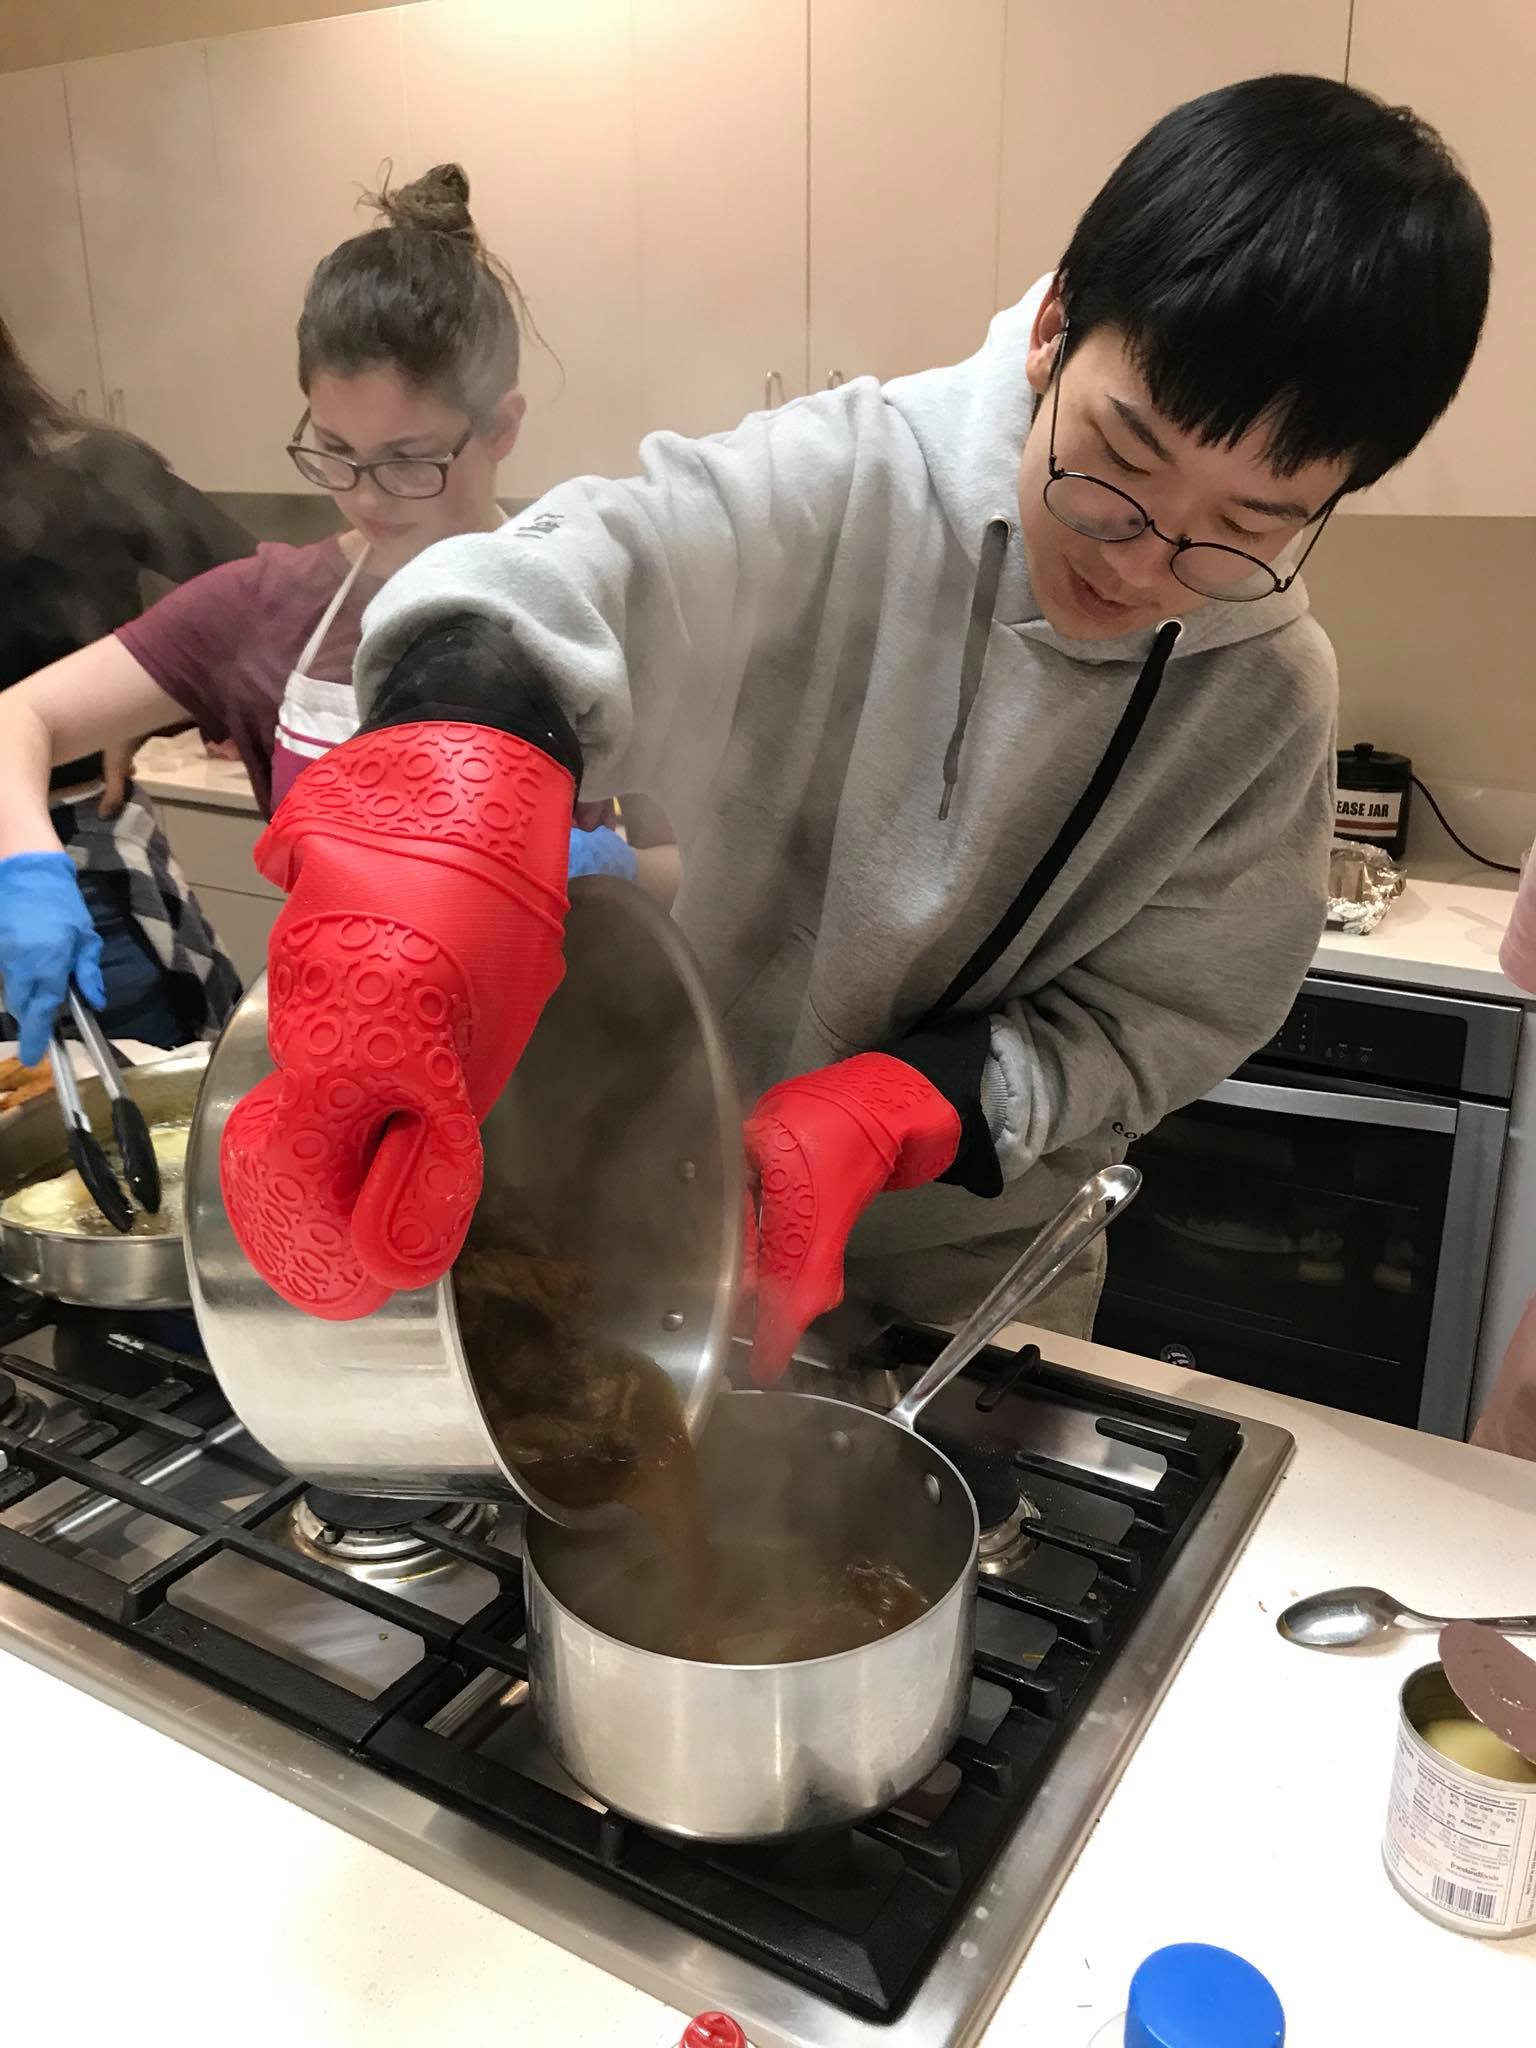 Student pouring a pot of liquid into another pot